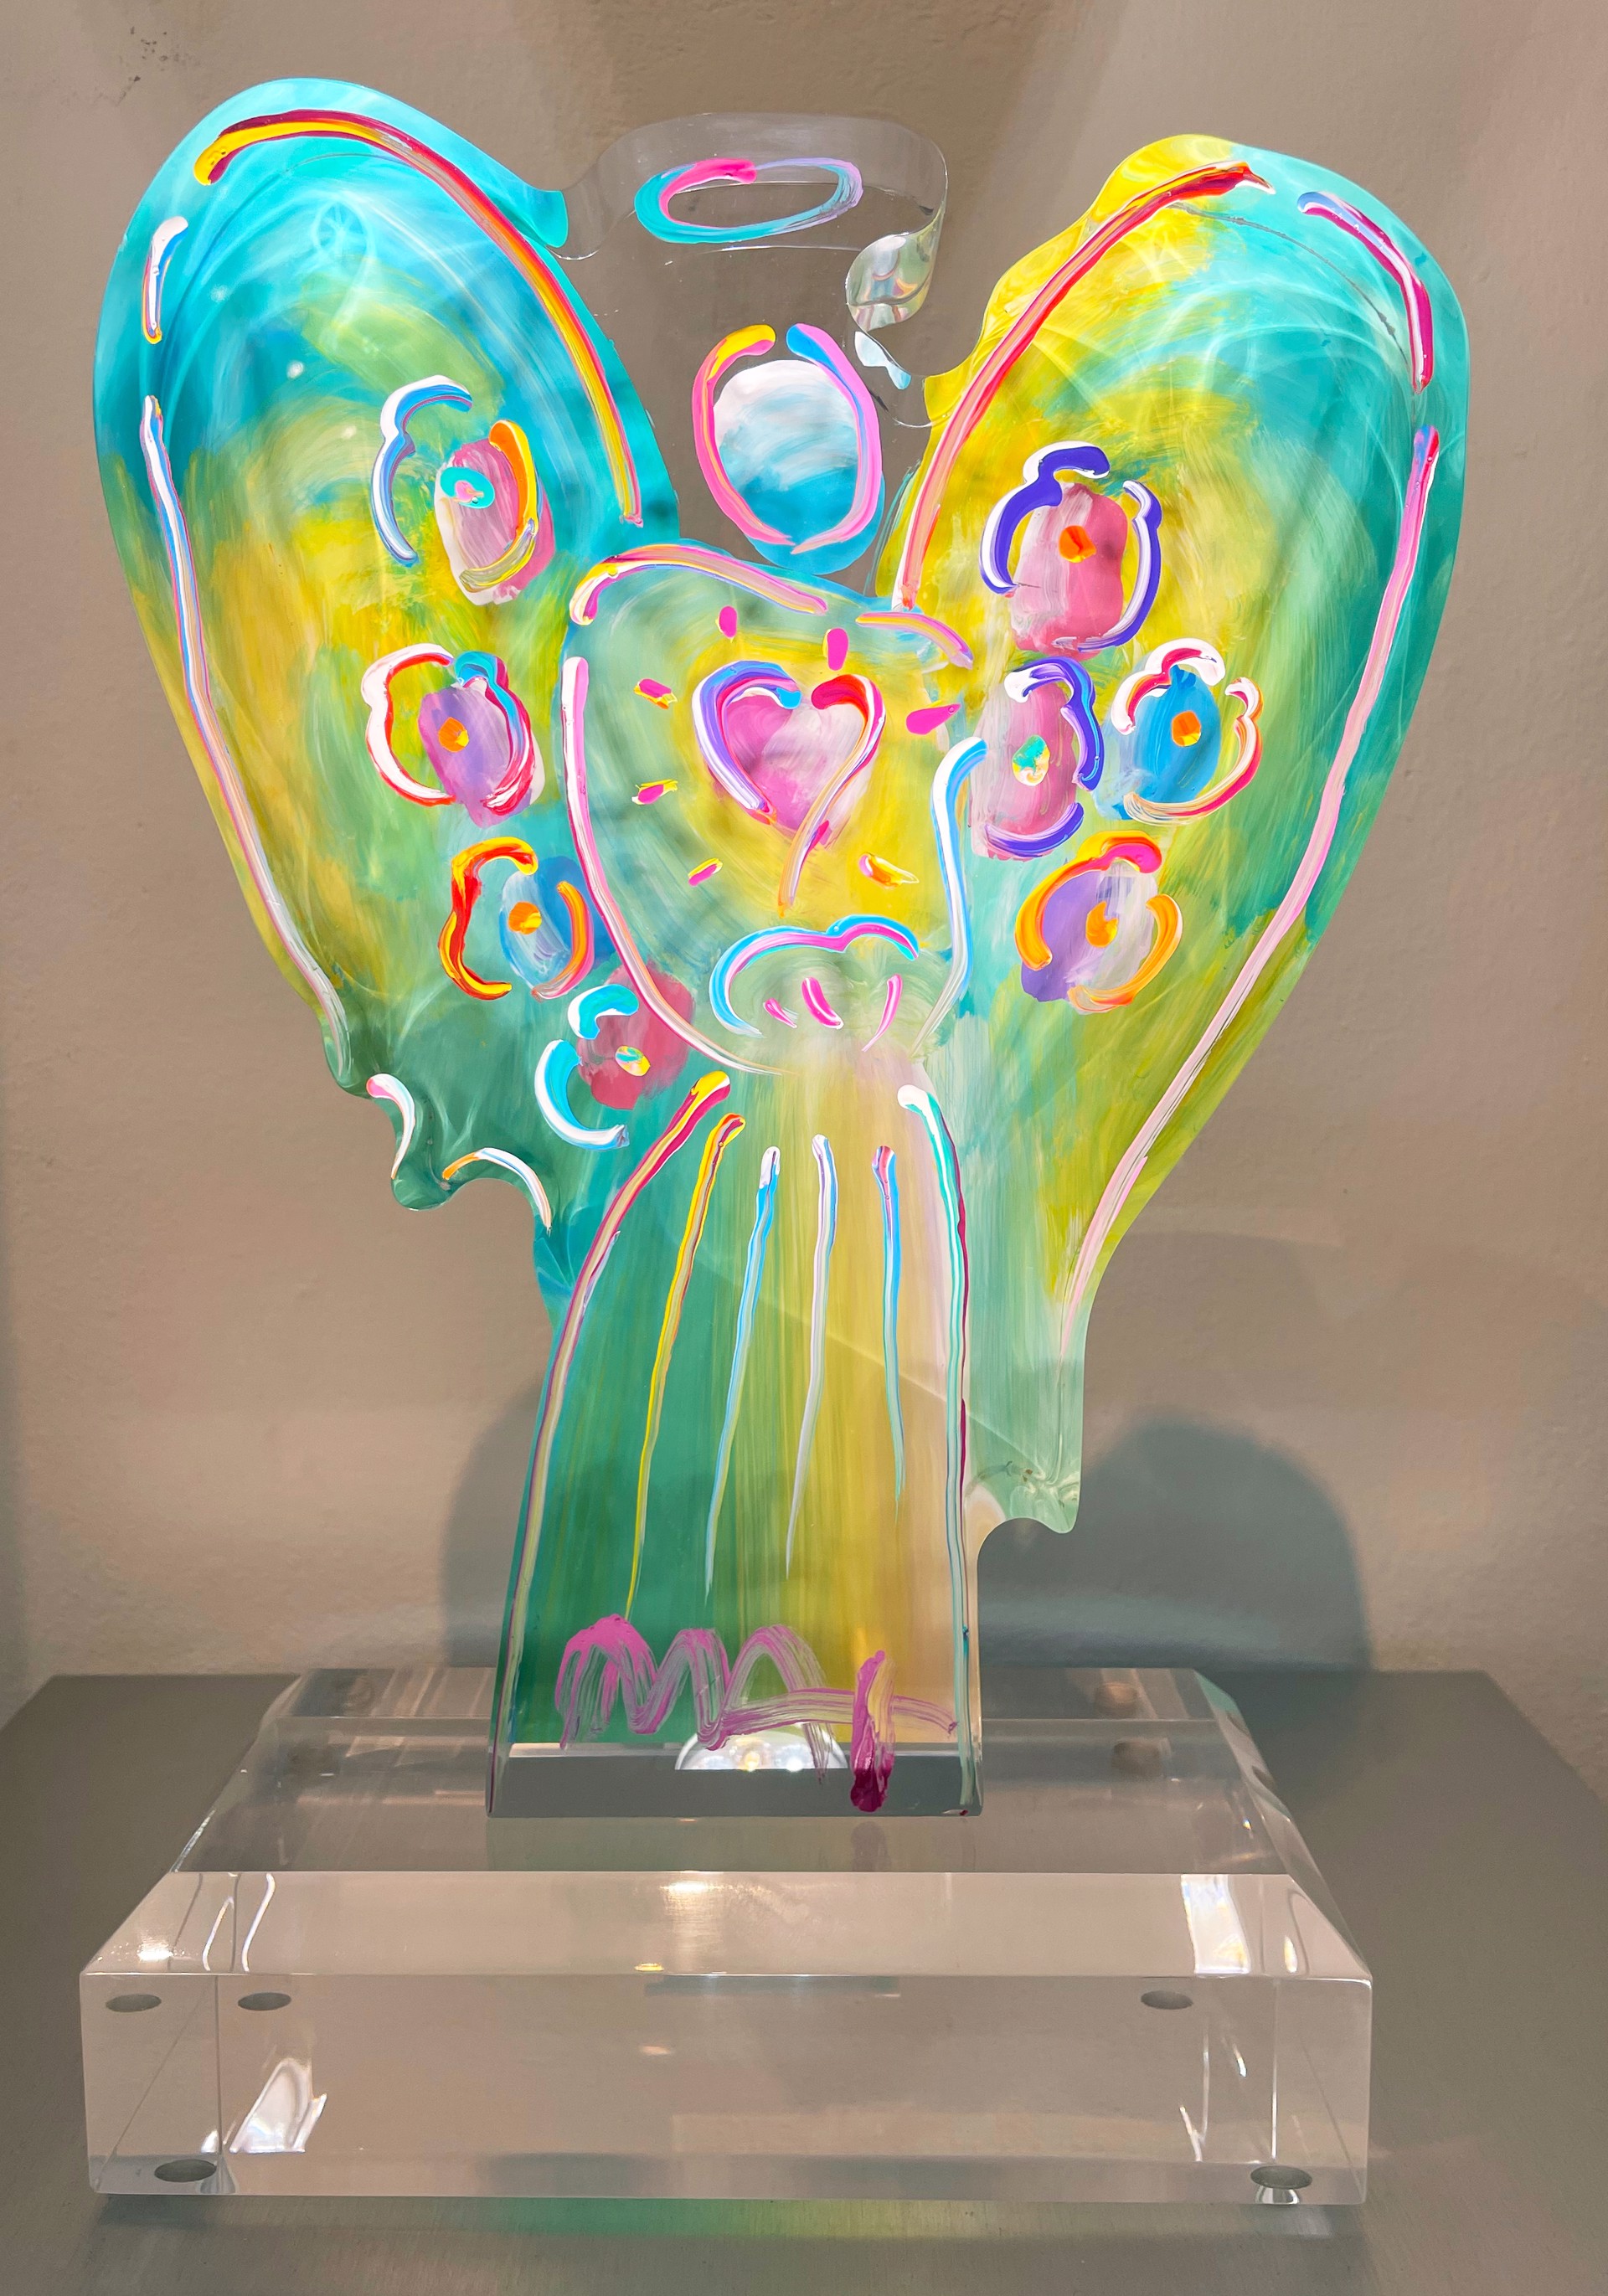 Angel with Heart by Peter Max